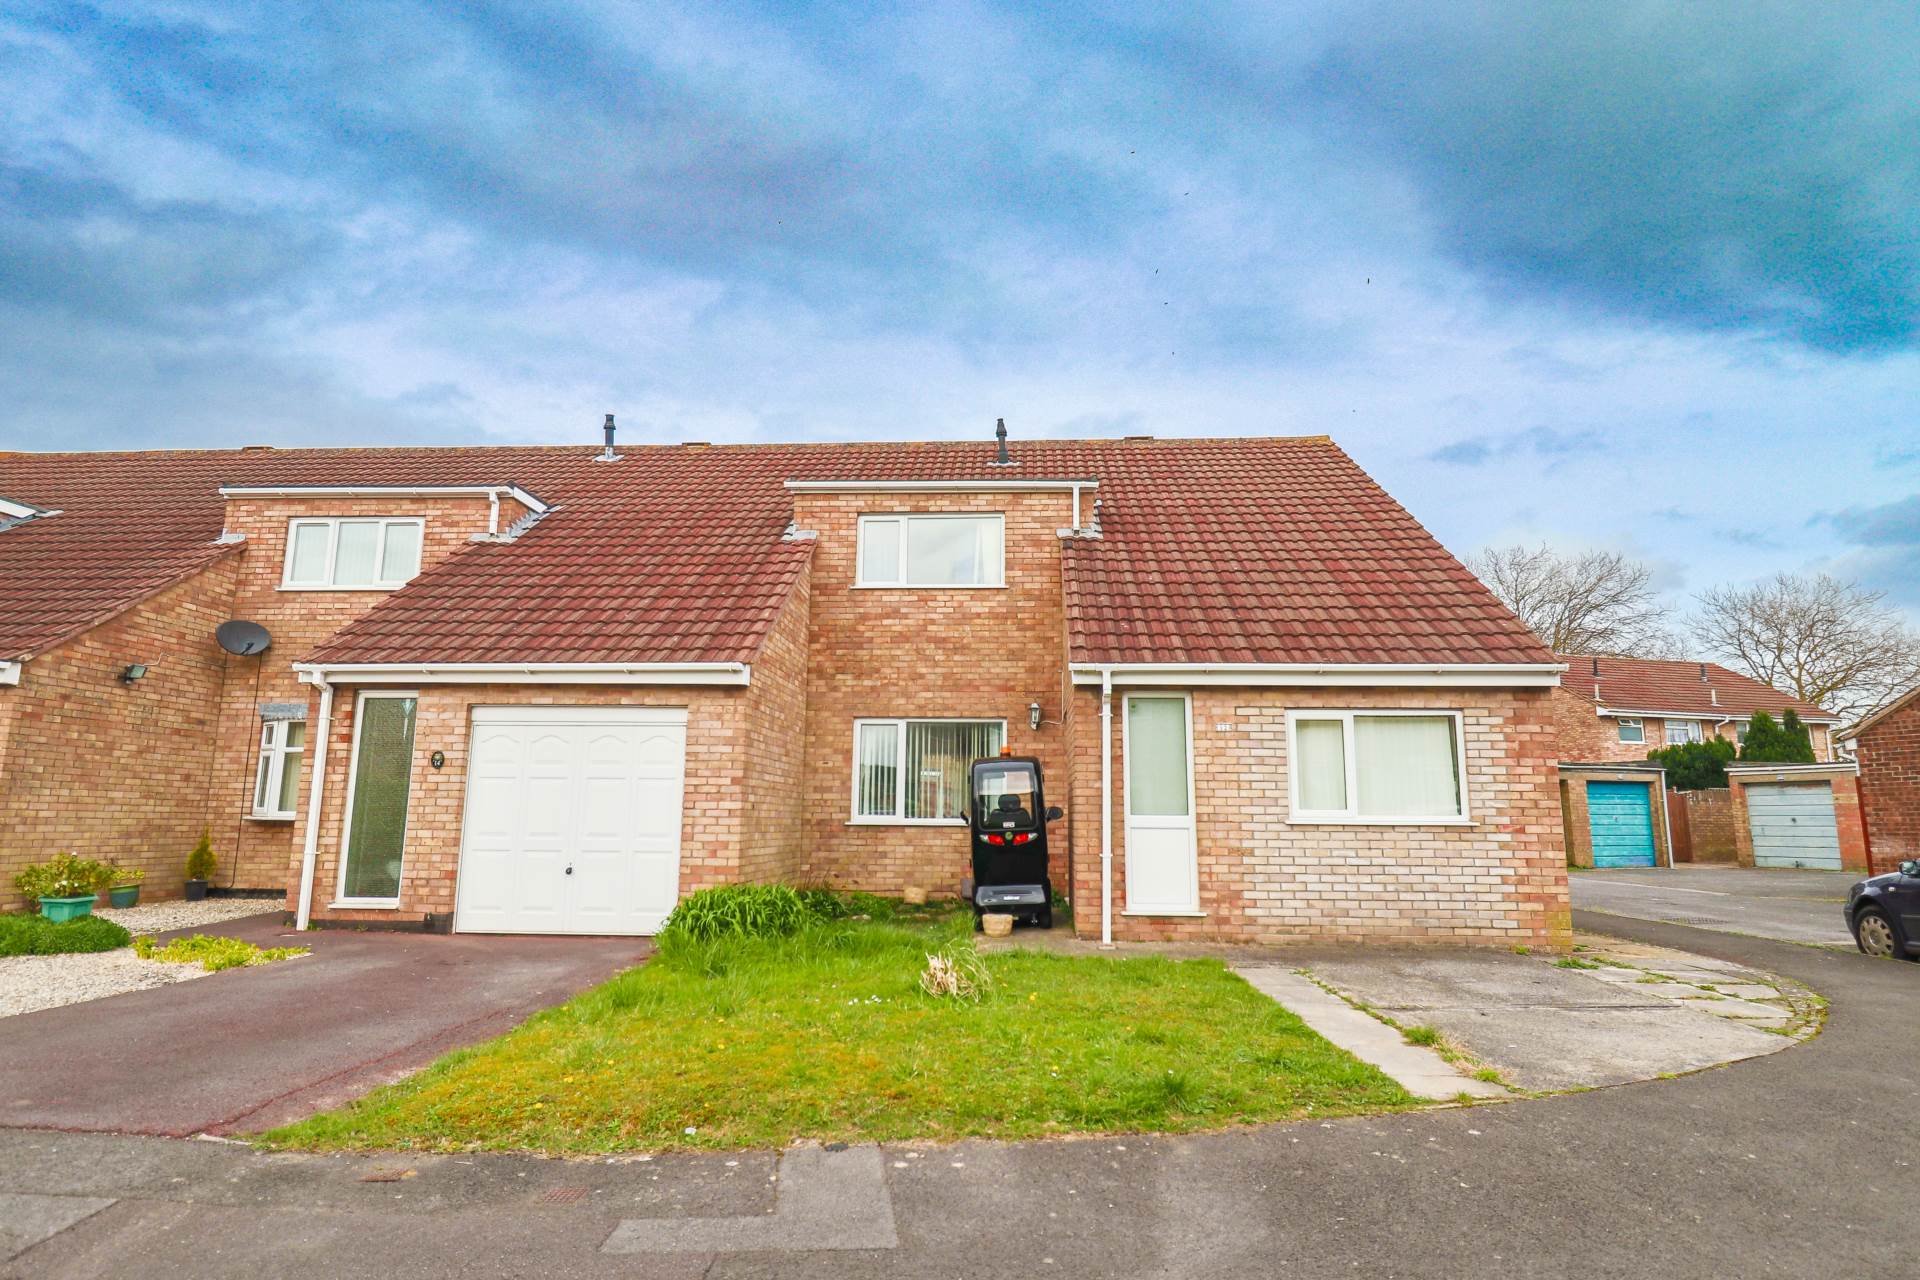 Lester Drive - Worle, Image 1